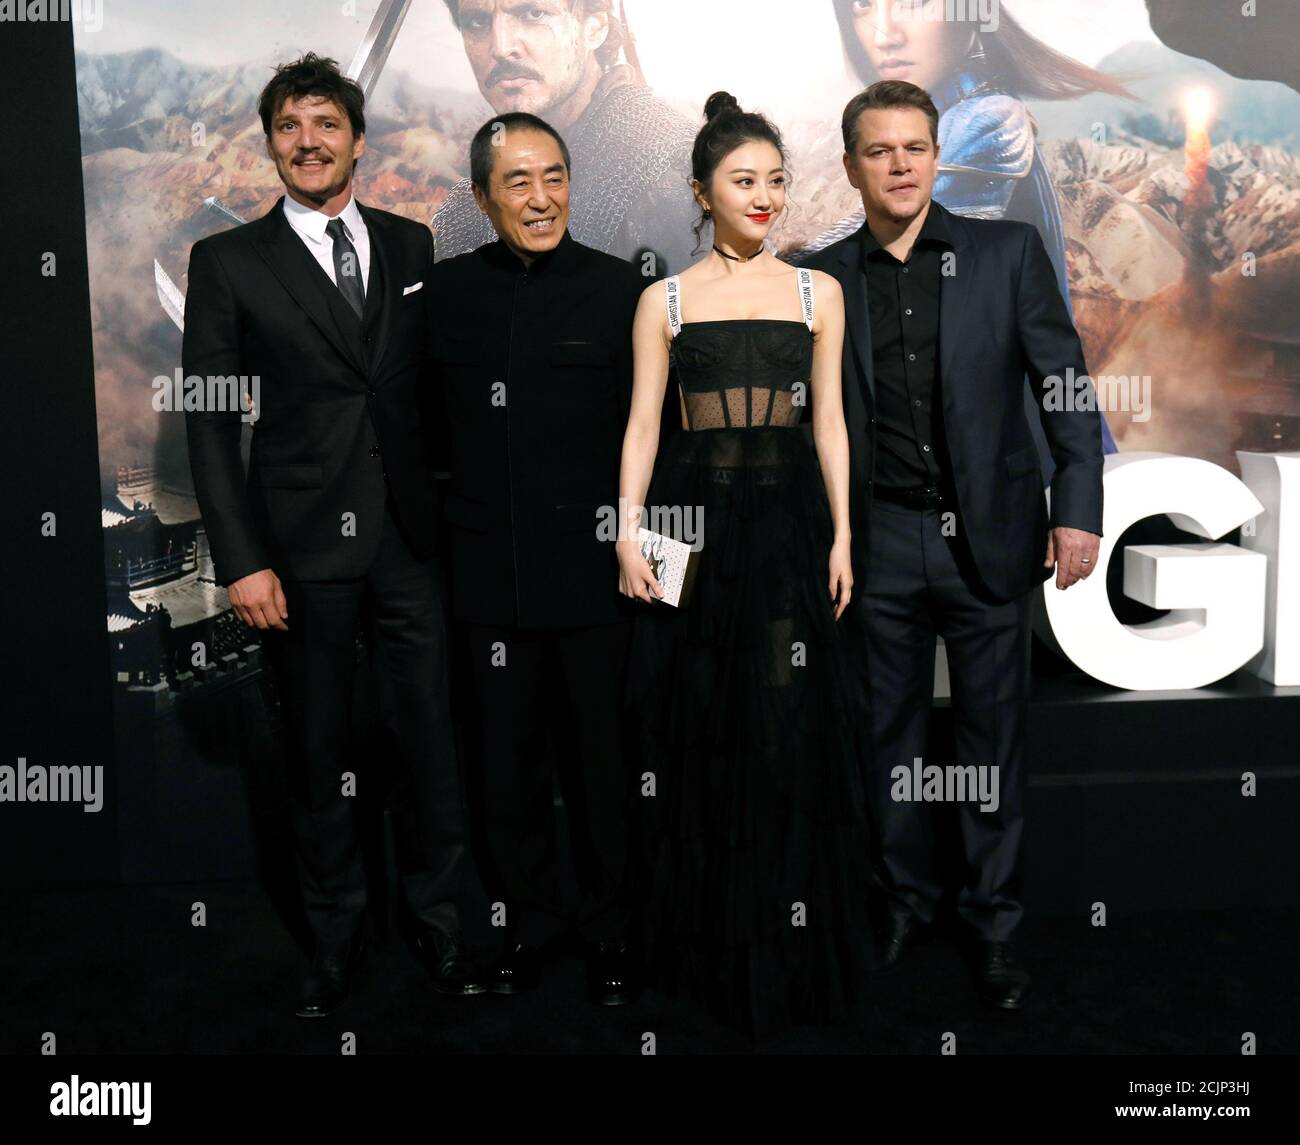 Director Of The Movie Zhang Yimou 2nd L Poses With Cast Members L R Pedro Pascal Tian Jing And Matt Damon At The Premiere Of The Great Wall In Los Angeles California U S